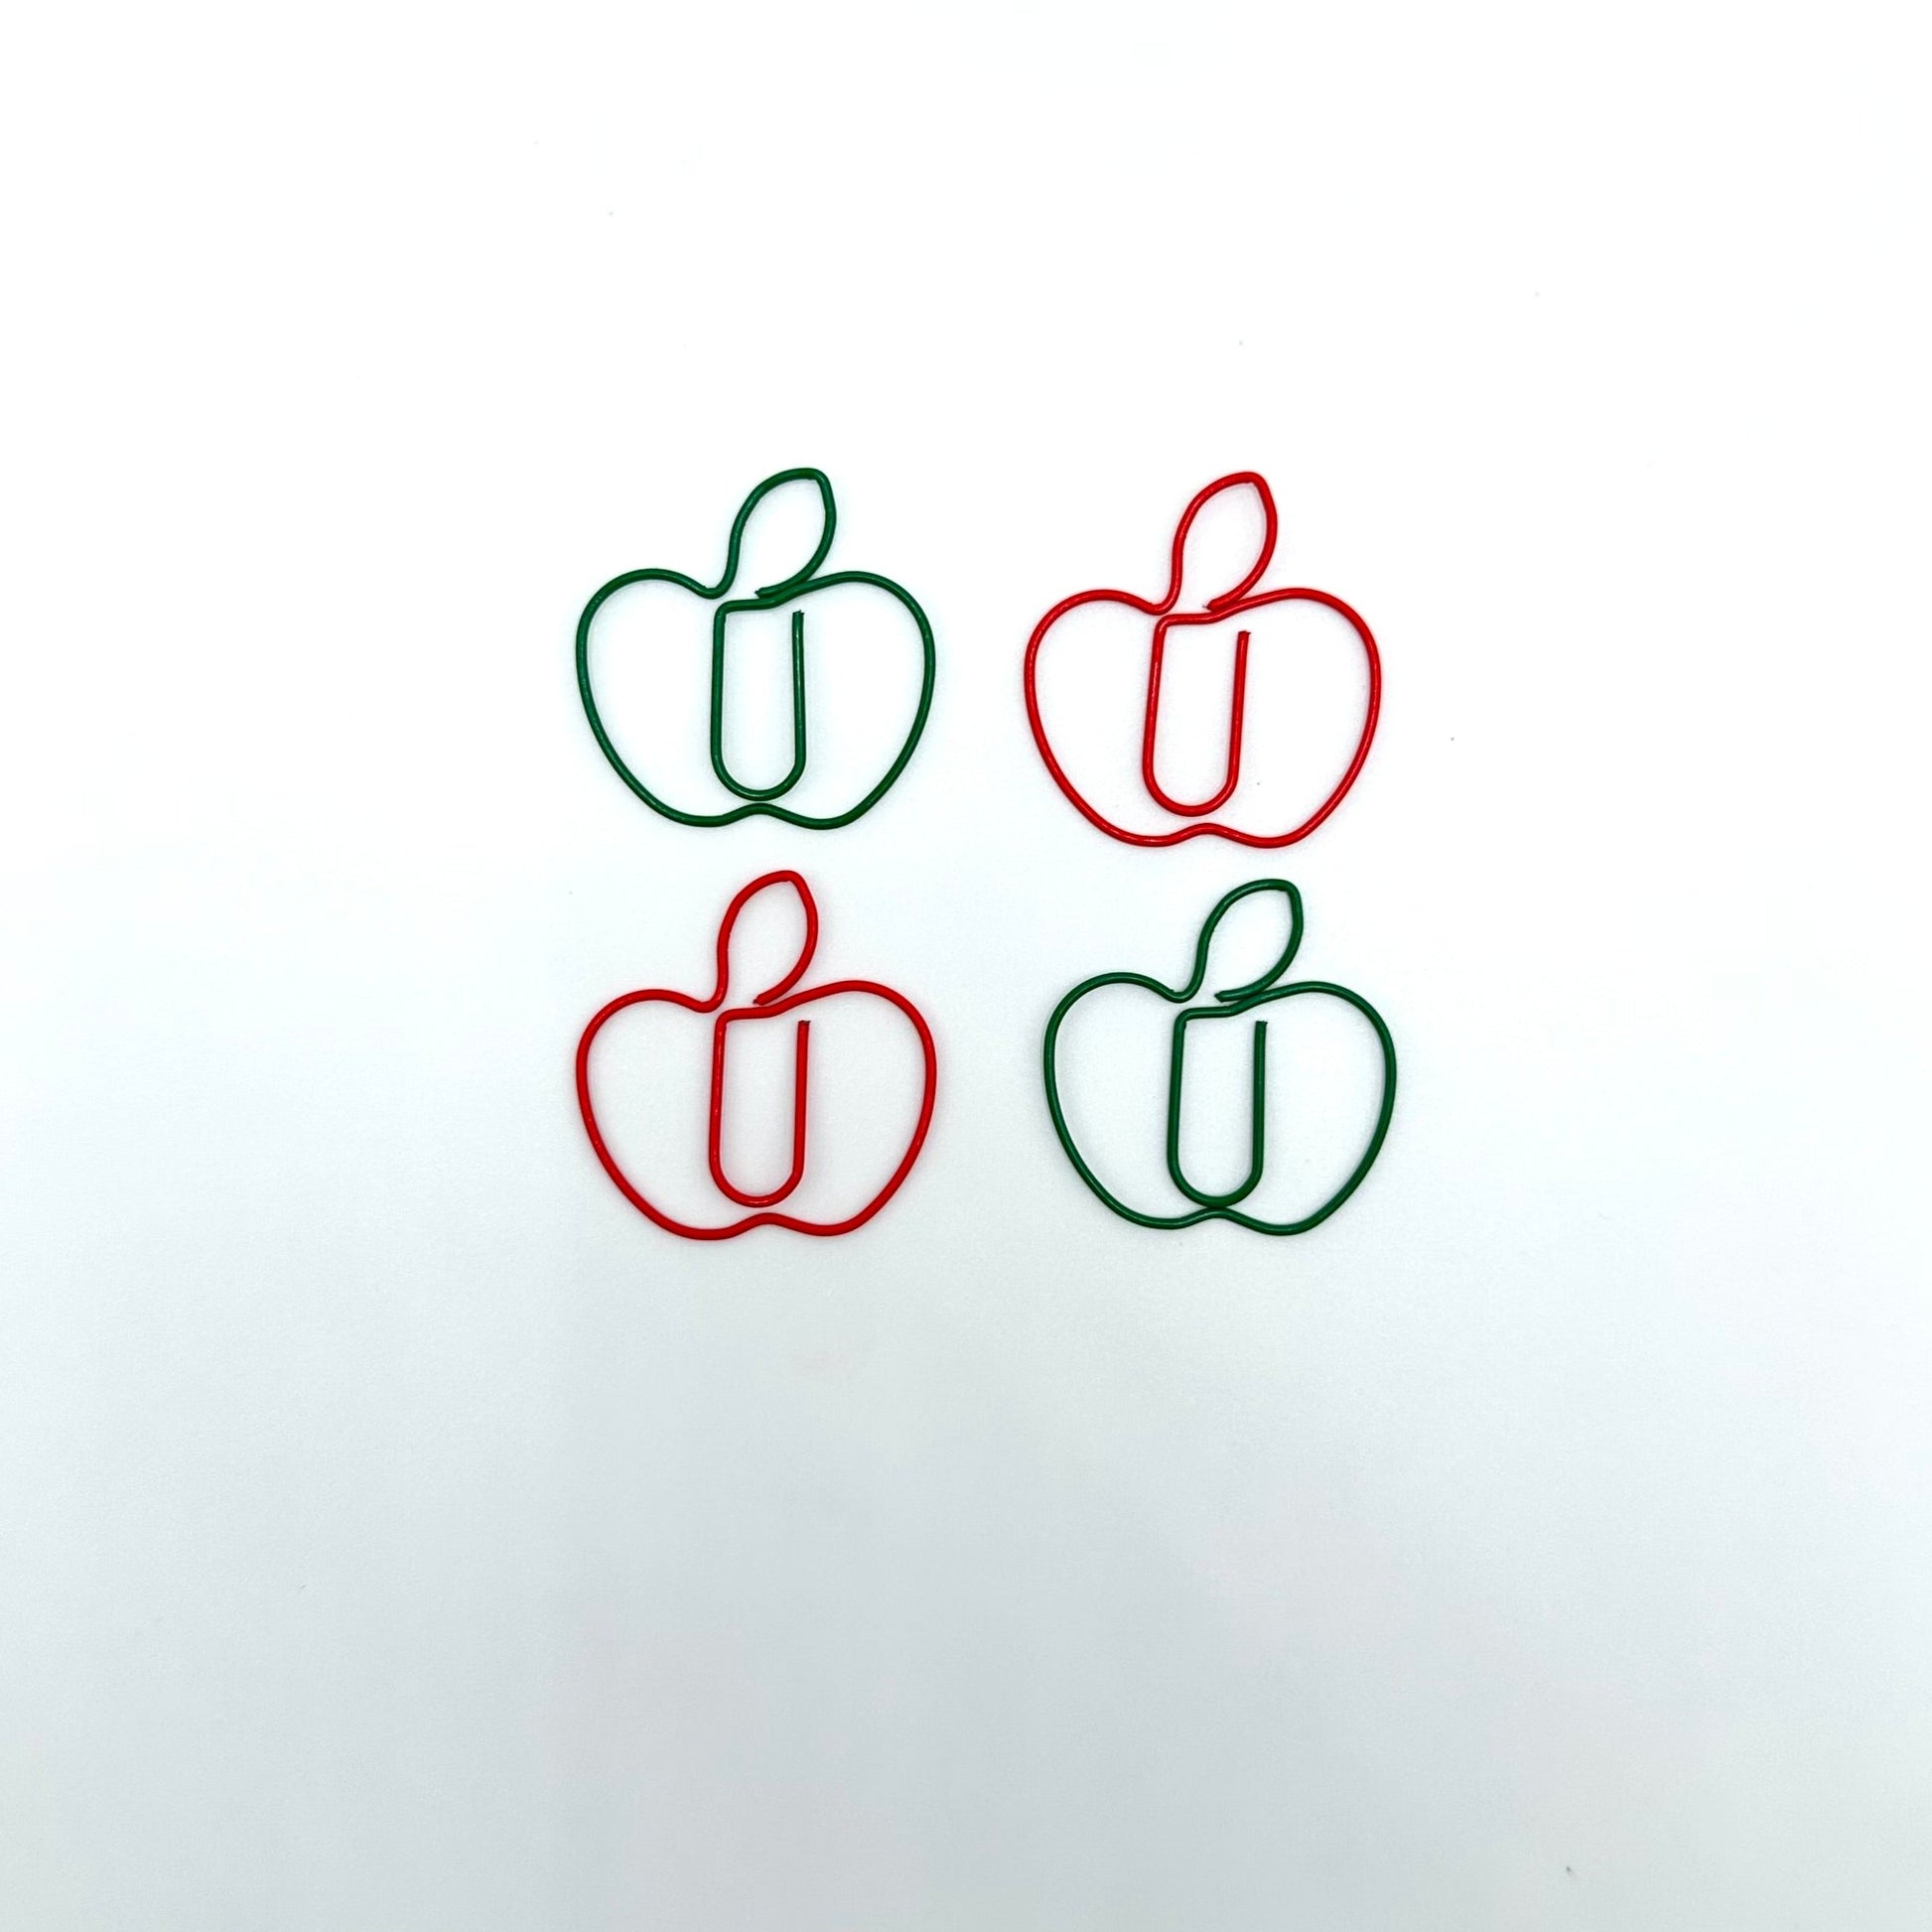 4 paperclips in the shape of apples. 2 red and 2 green.